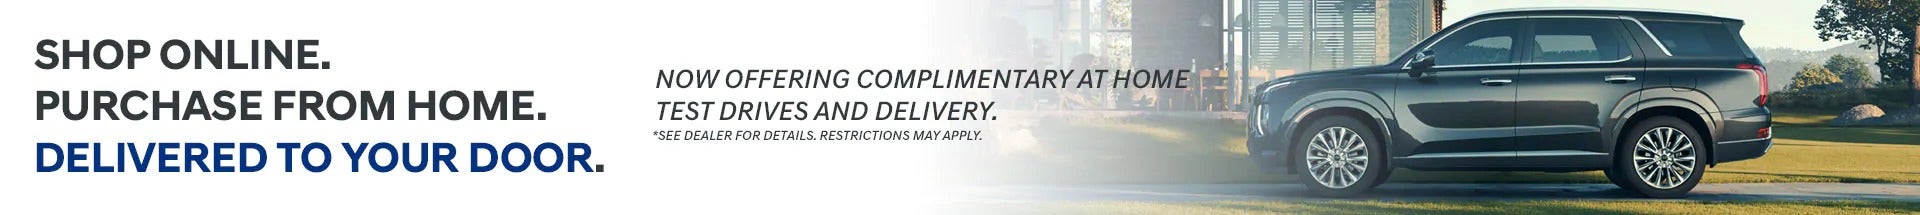 Shop online. Purchase from home. Delivered to your door. Now Offering complimentary at home test drives and delivery. *Restrictions may apply. See dealer for details.